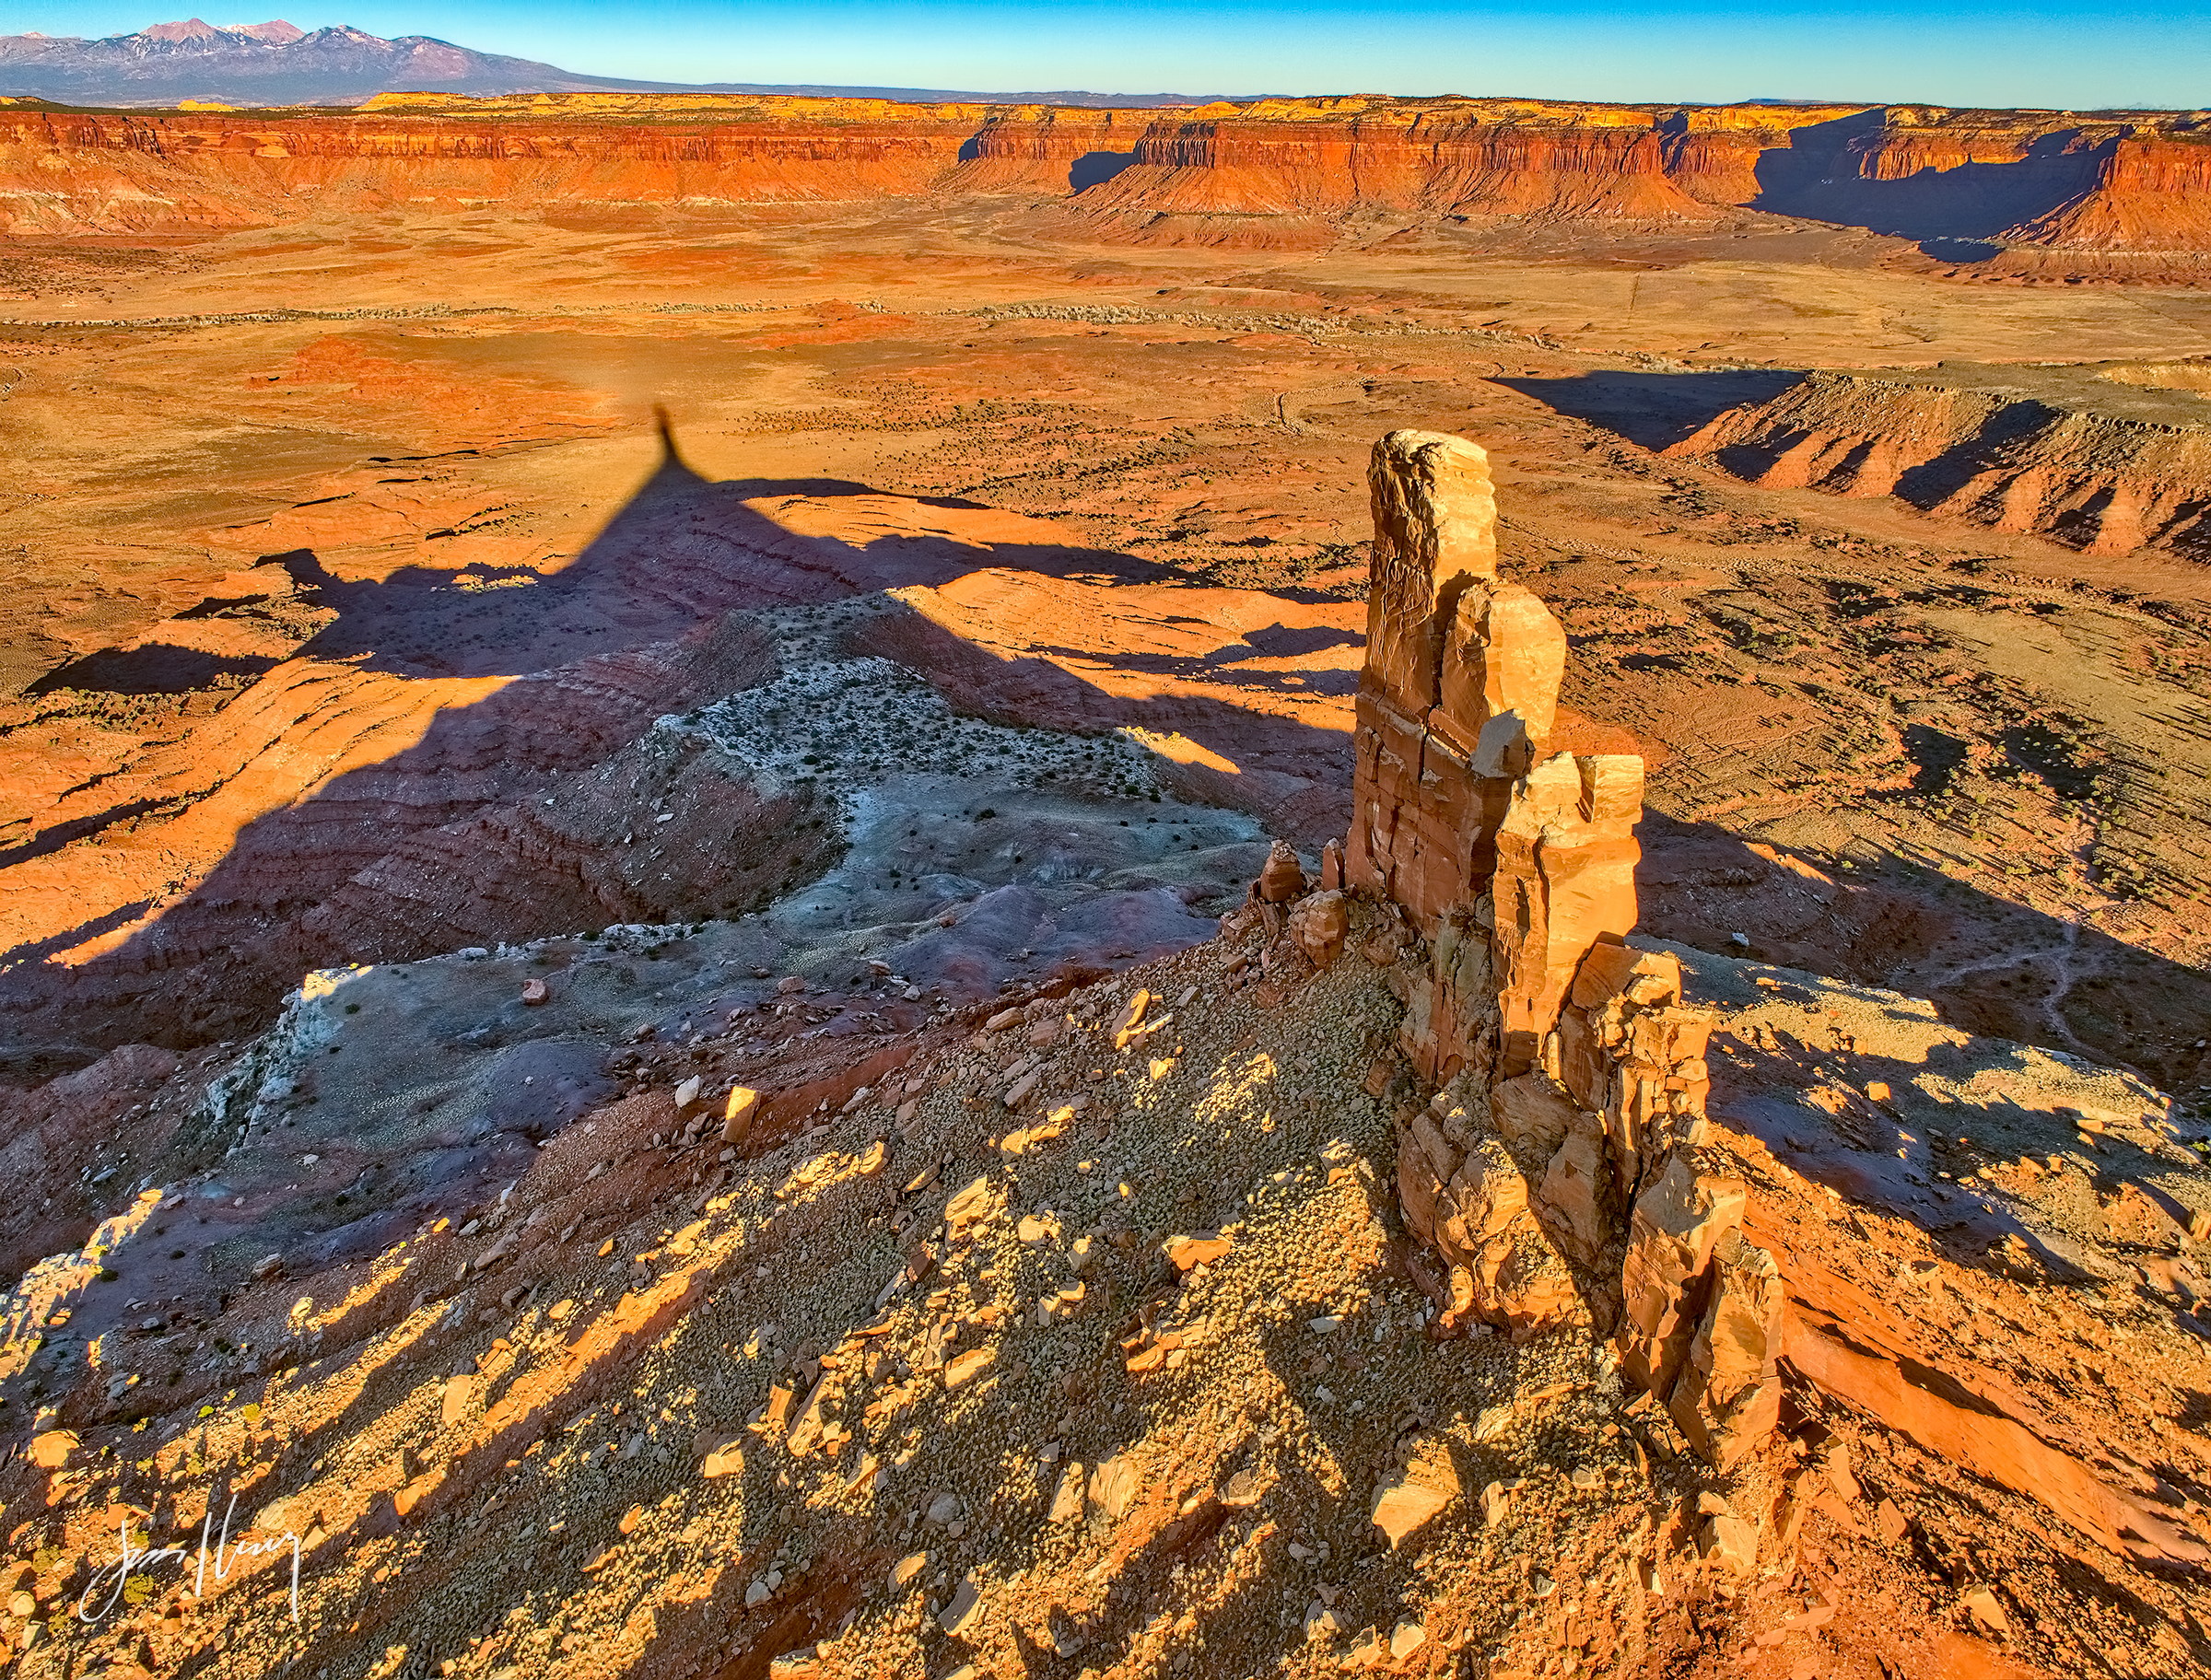 North Six-shooter Peak and its shadow at sunset, Indian Creek district near Canyonlands NP, Utah.